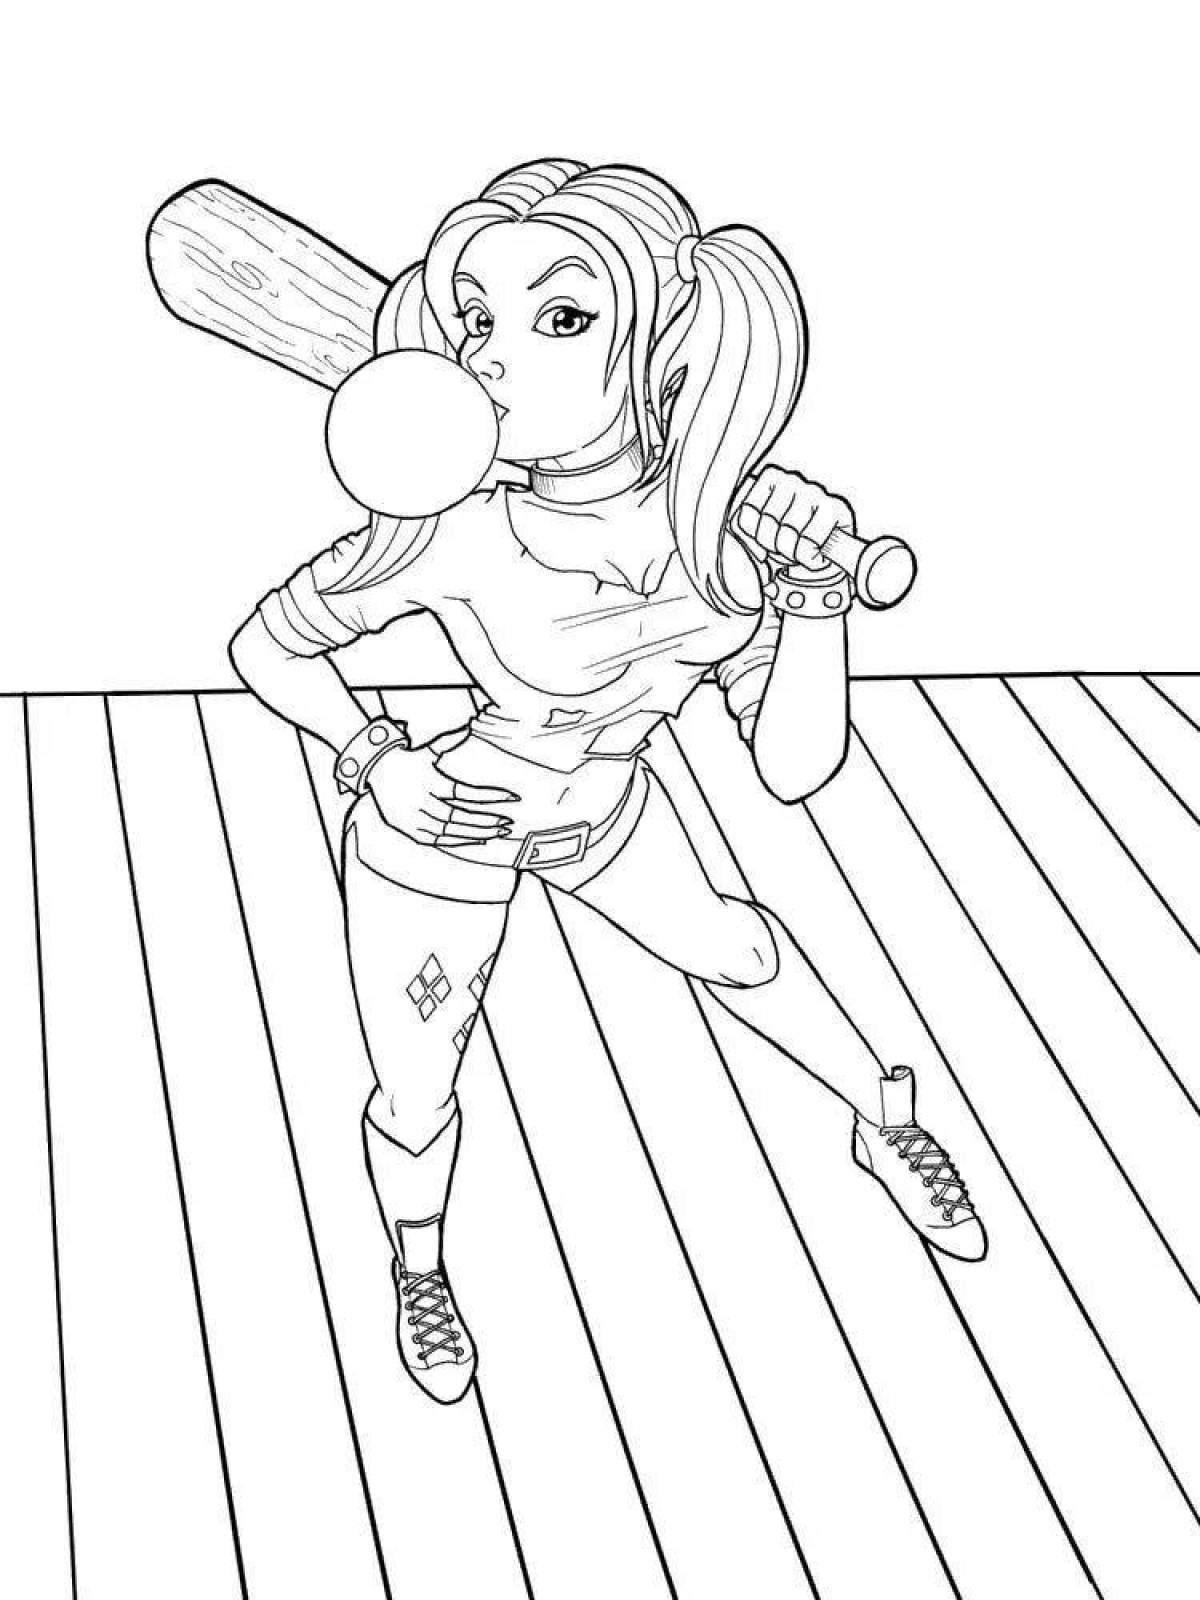 Attractive coloring page 18 vulgar on android